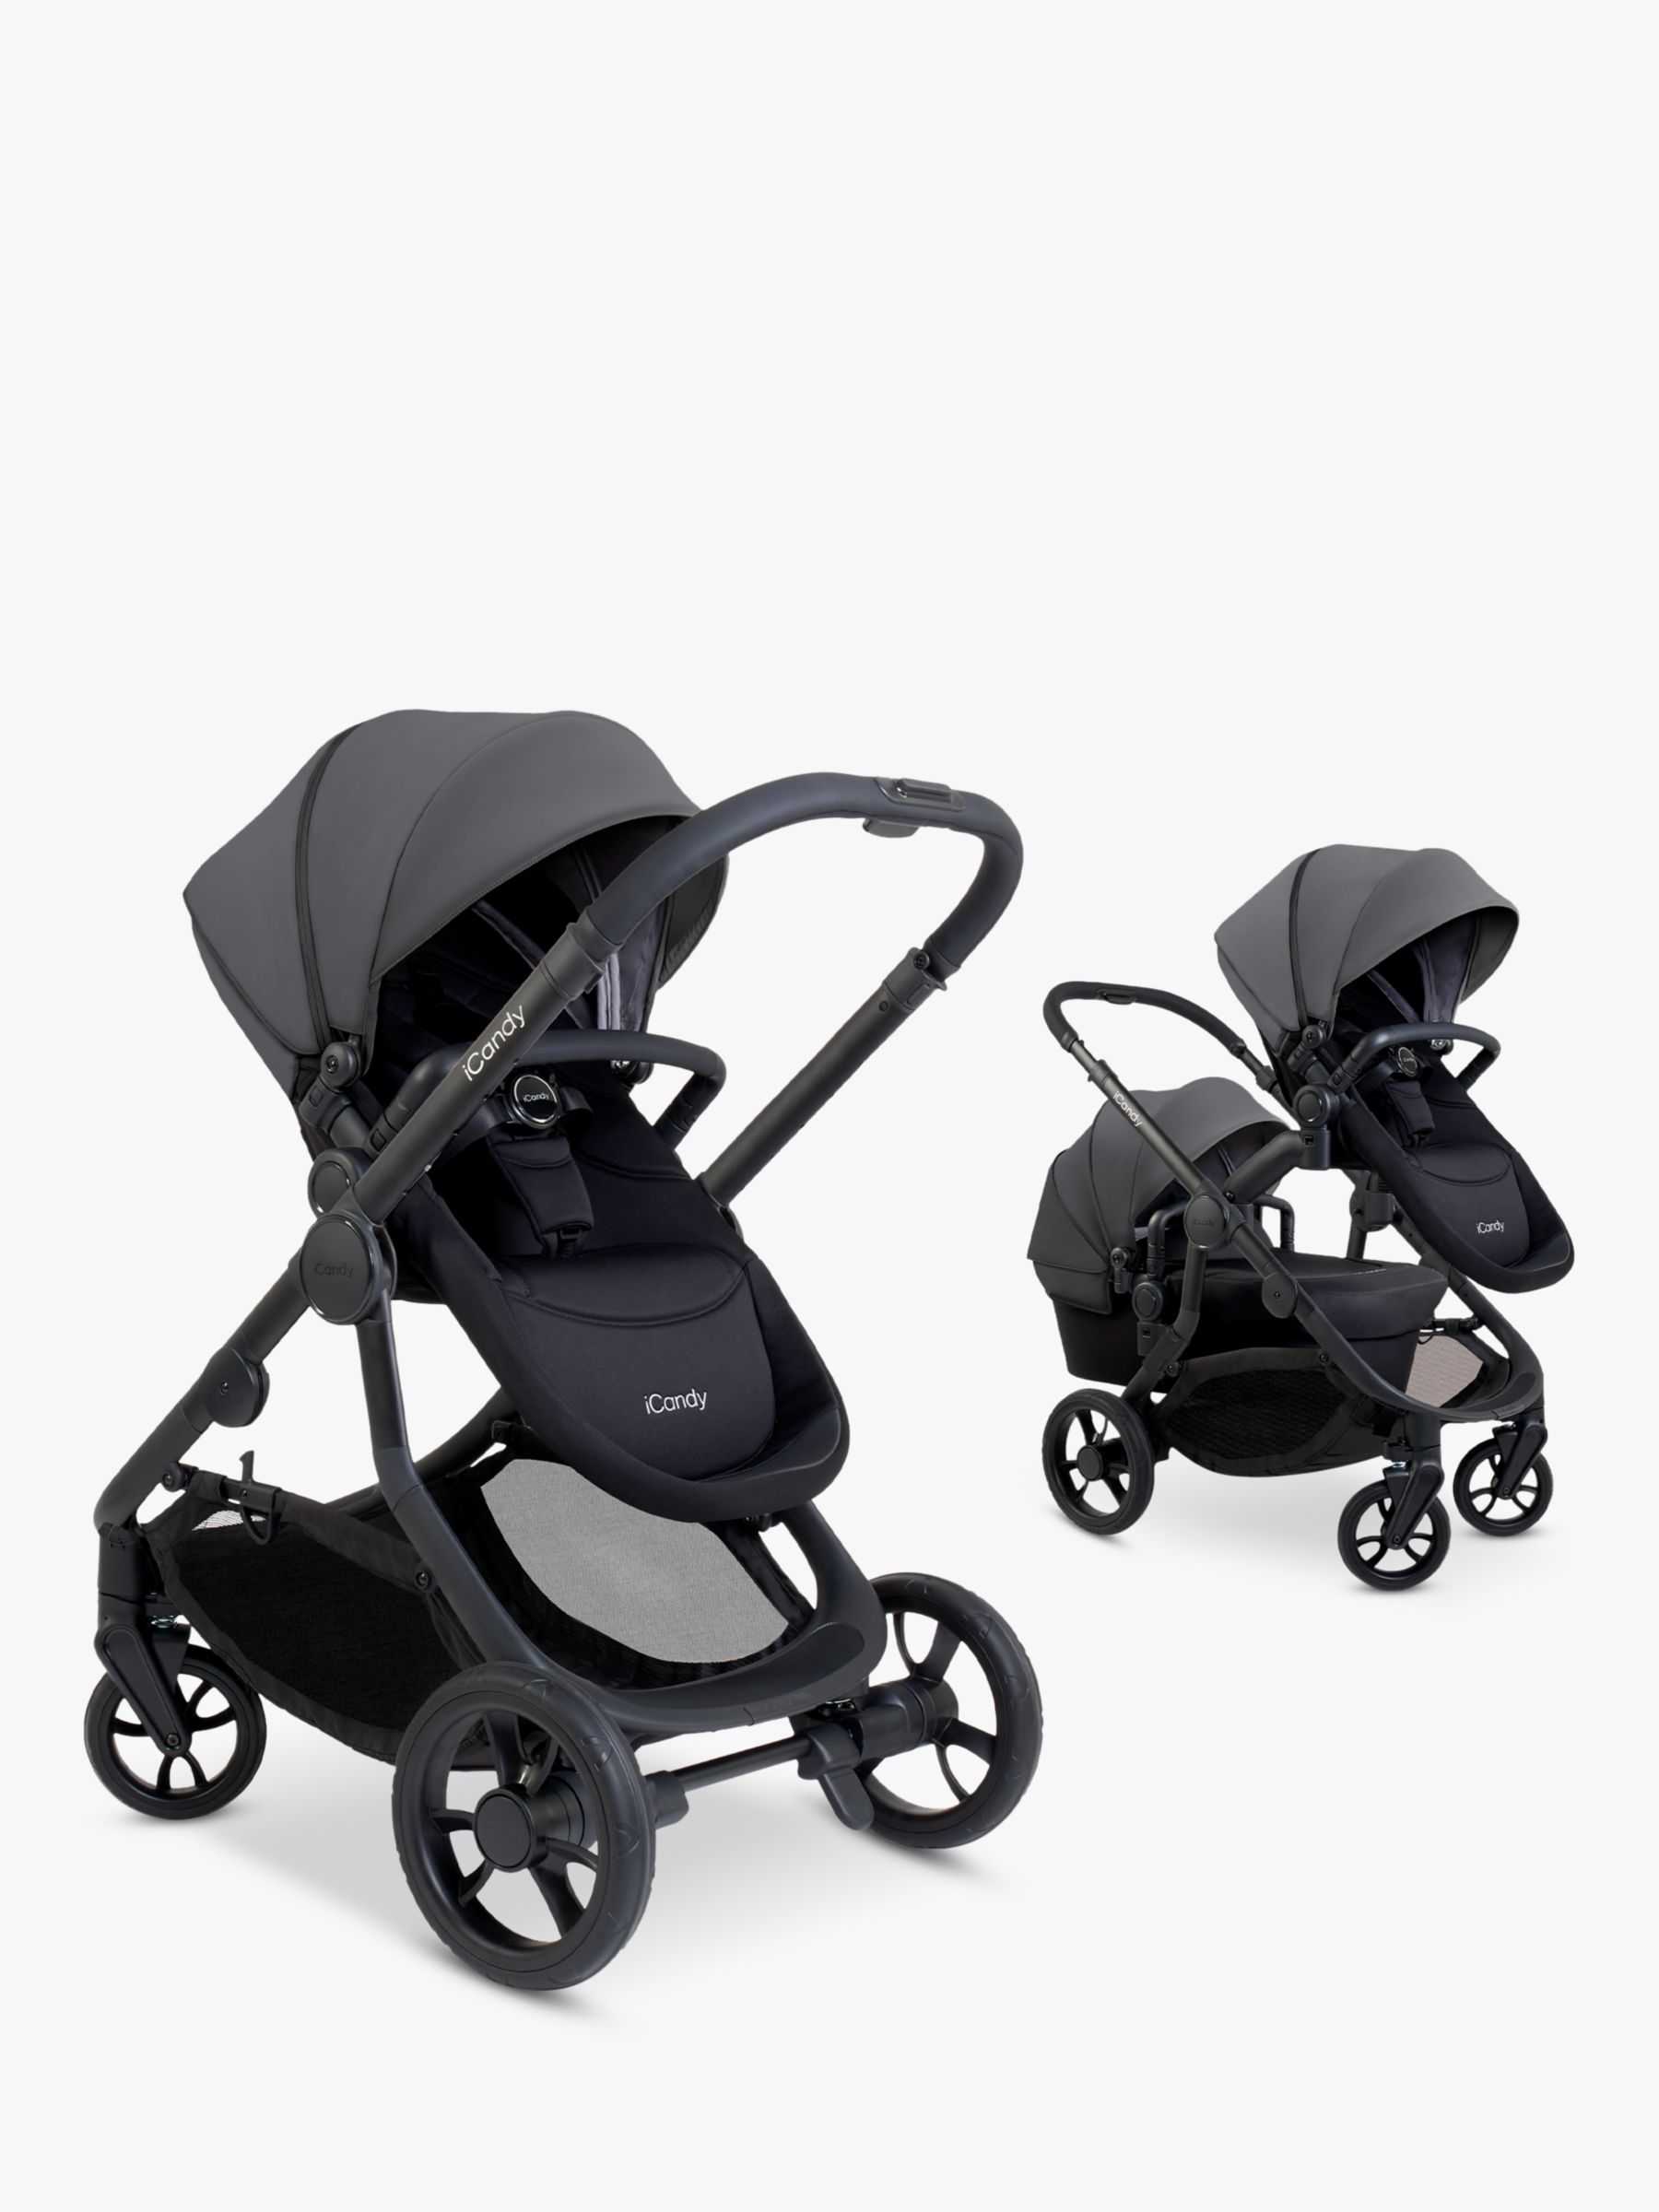 iCandy 4 Pushchair, Carrycot and Accessori...